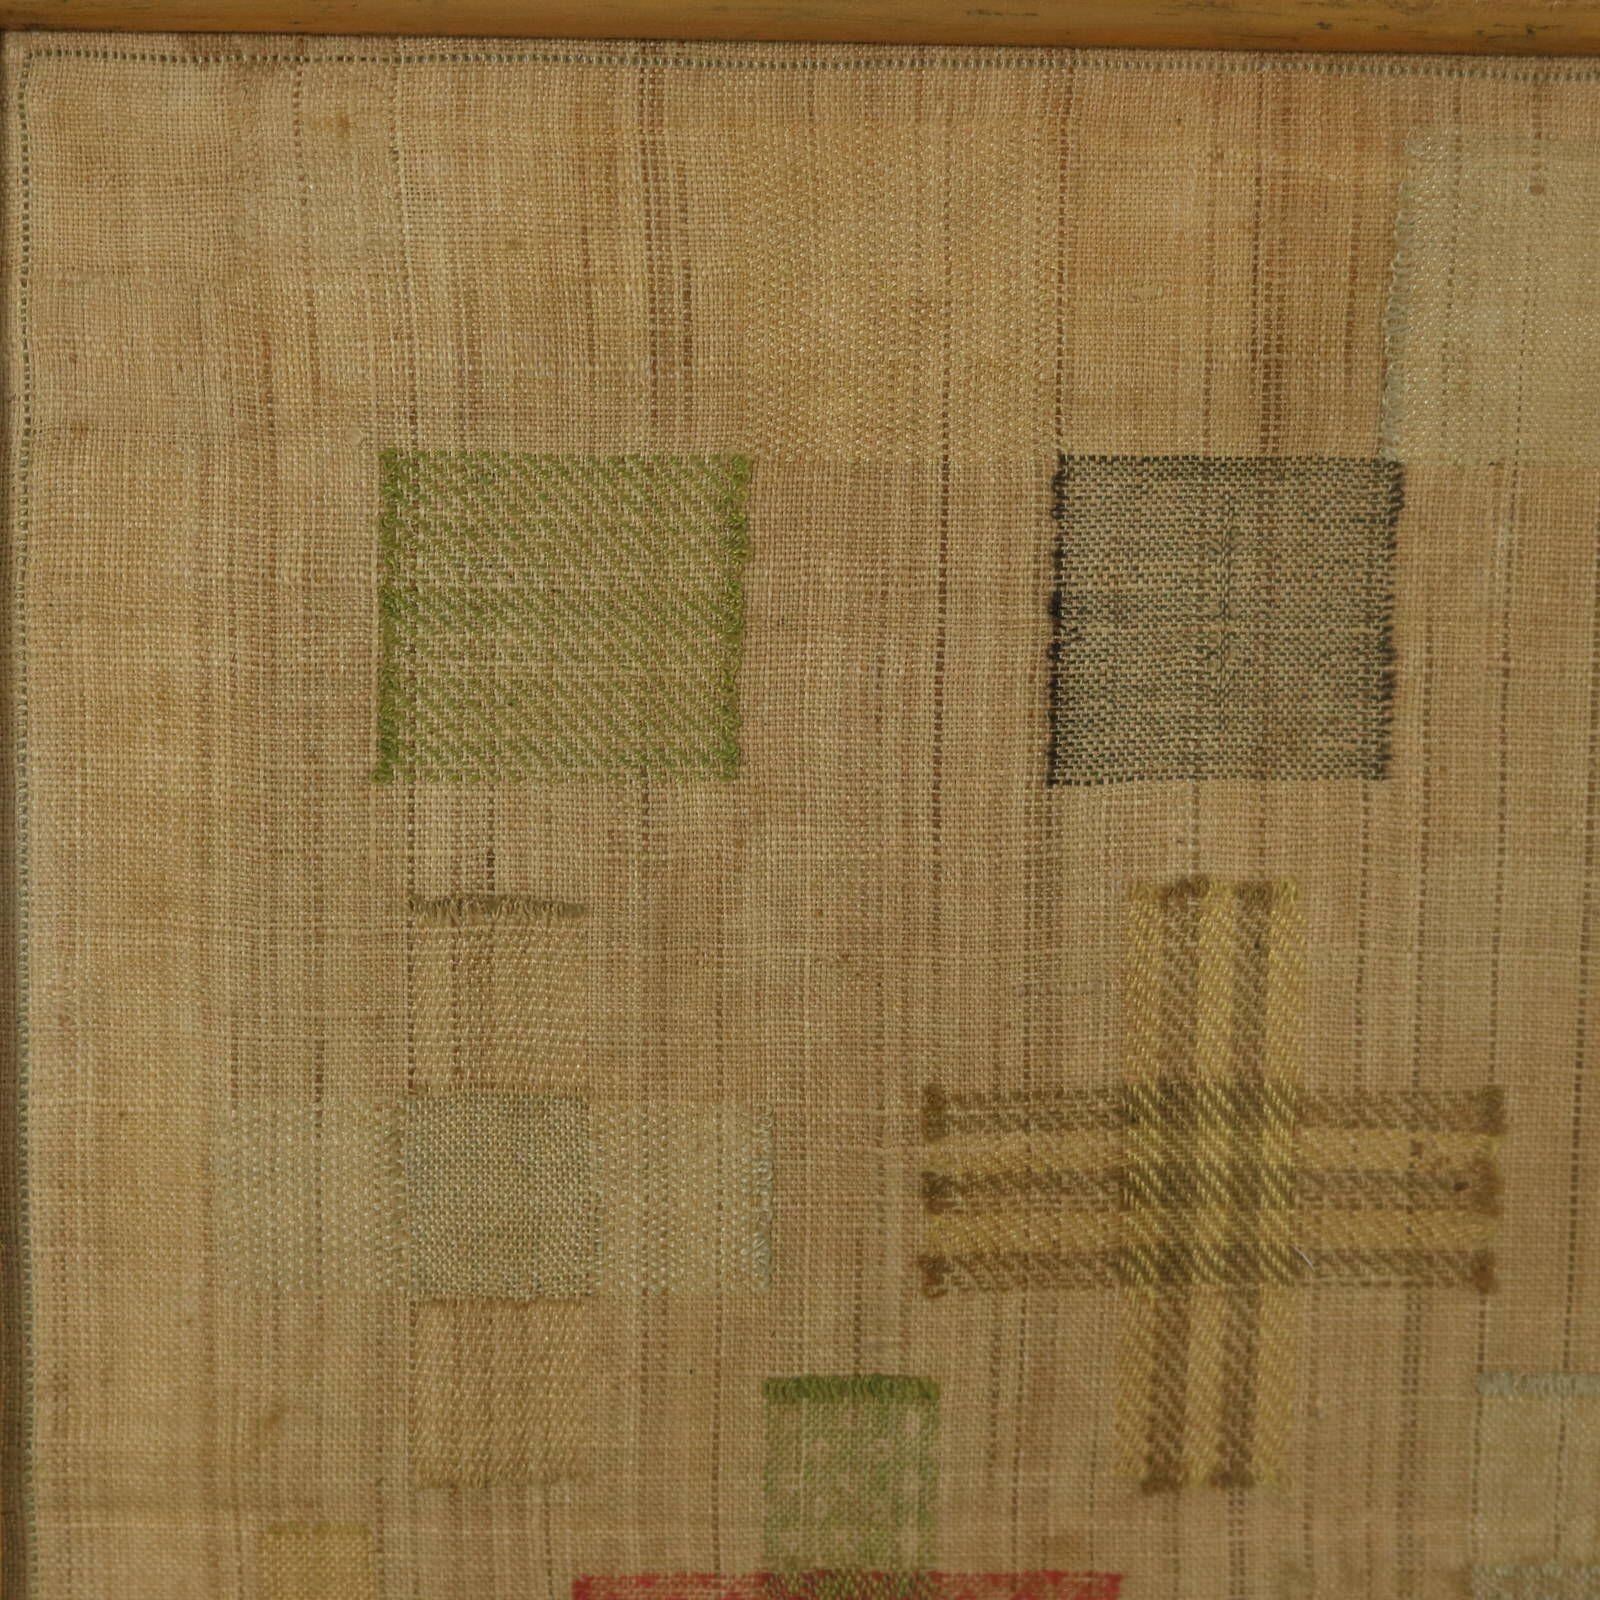 Antique Darning Sampler, 1791, by Ann Manning. The sampler is worked in silk threads on a linen ground, in a variety of stitches. Comprises of 15 darning panels, worked in various different techniques and patterns. Colours red, yellow, dark brown,